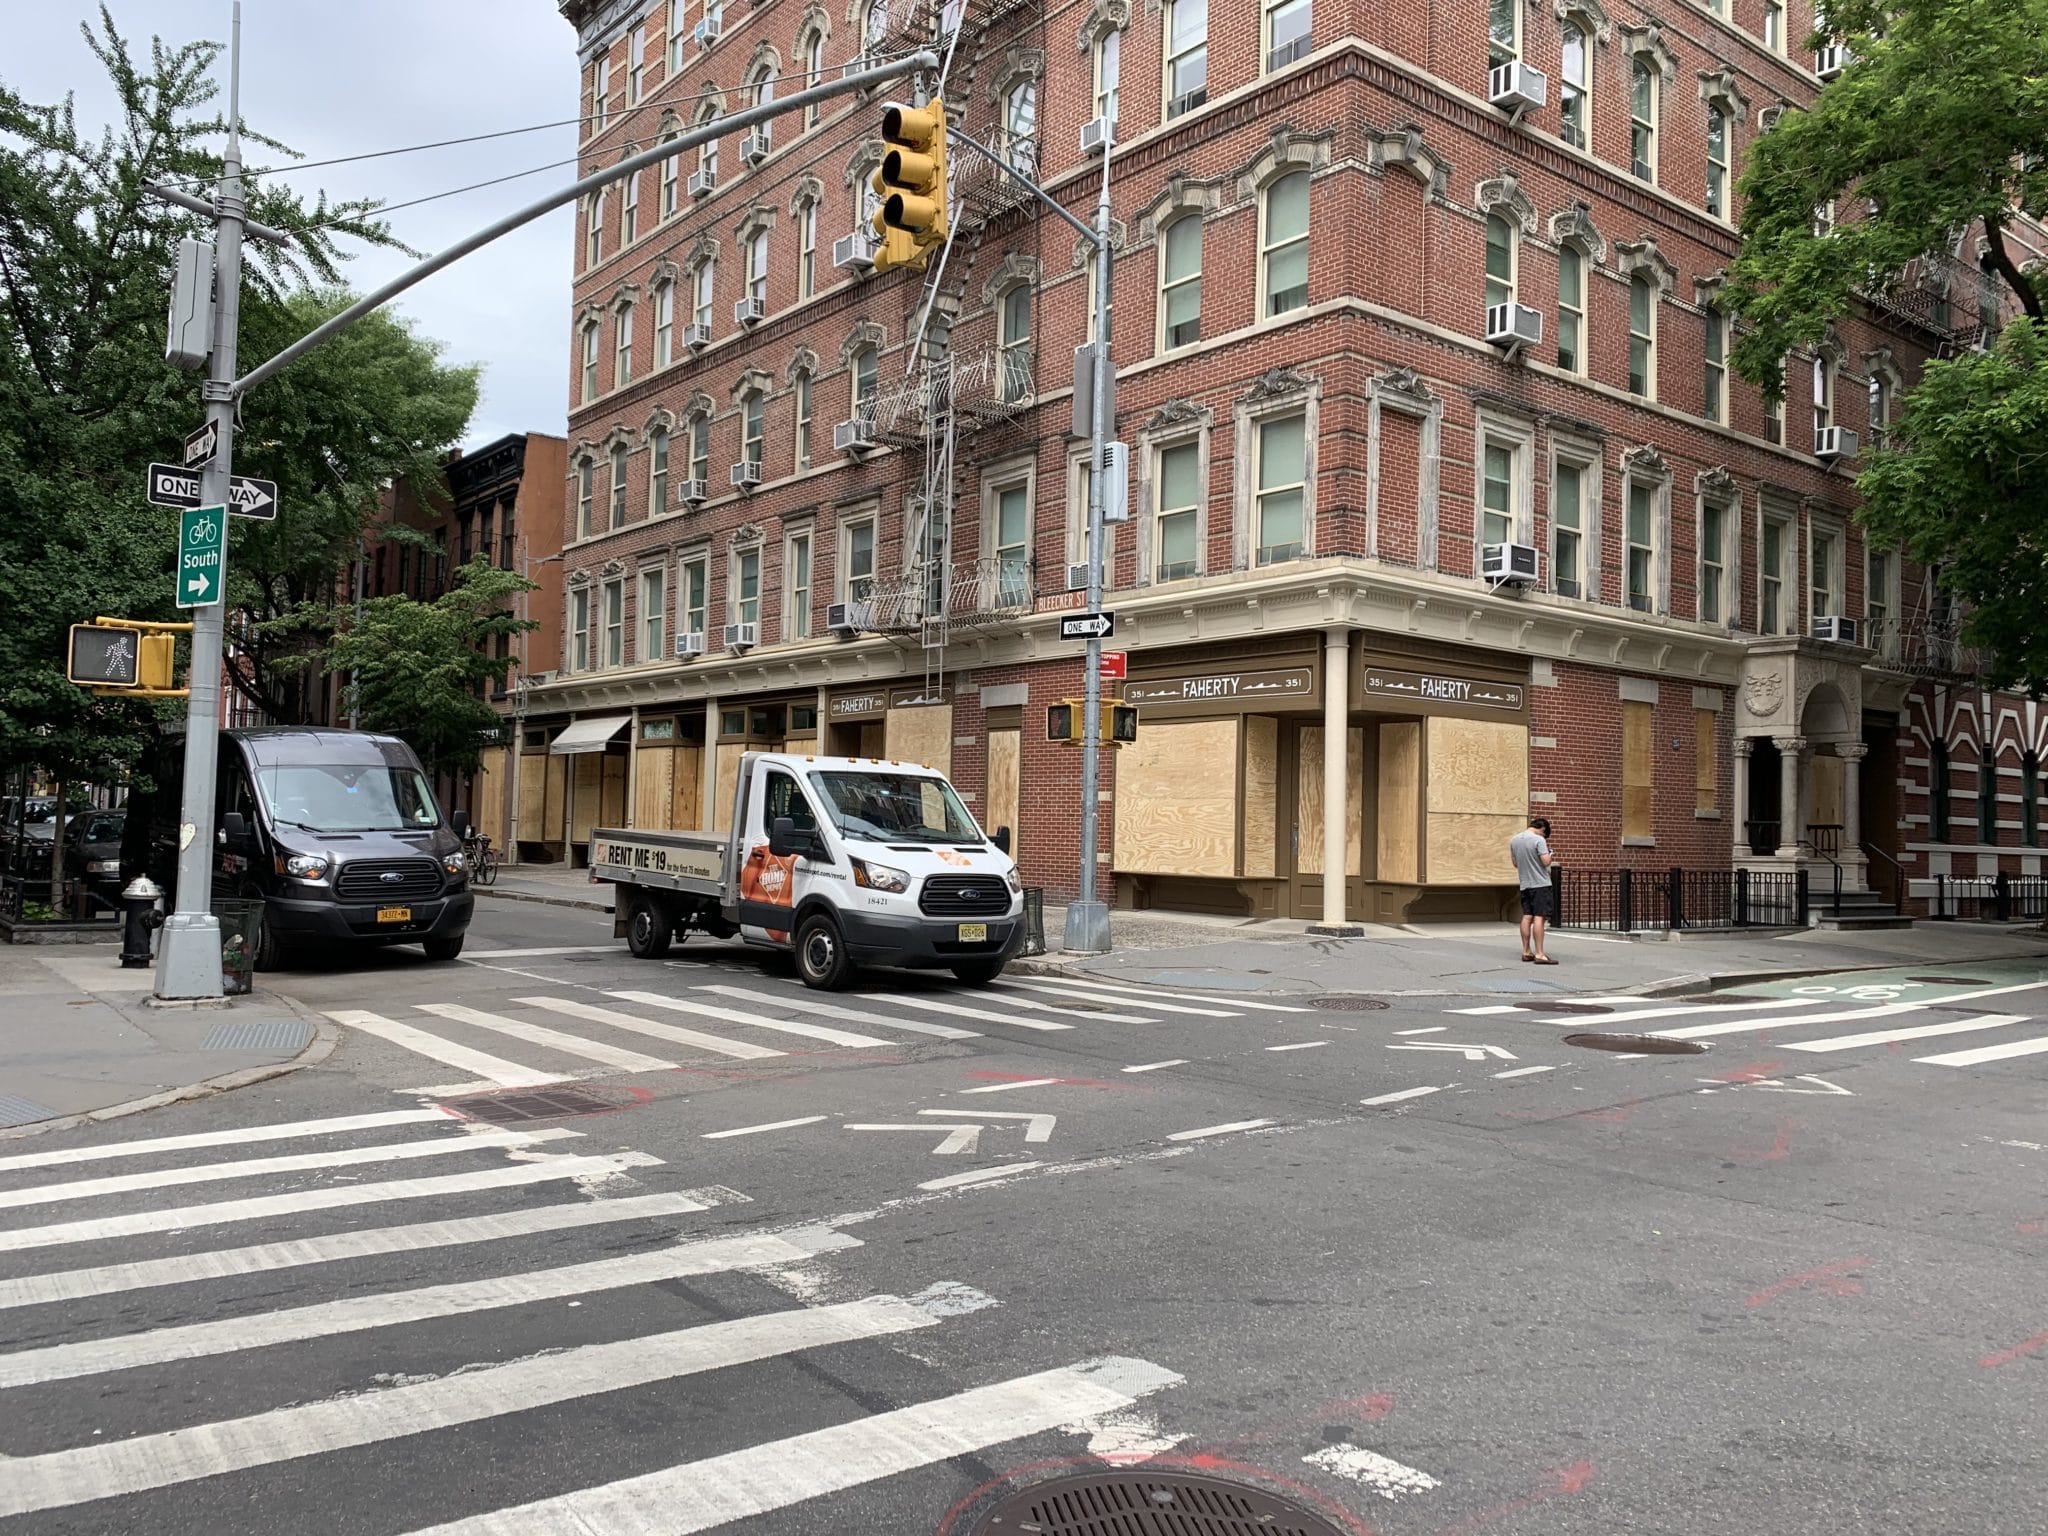 Iconic Bleecker Street with stores boarded up.